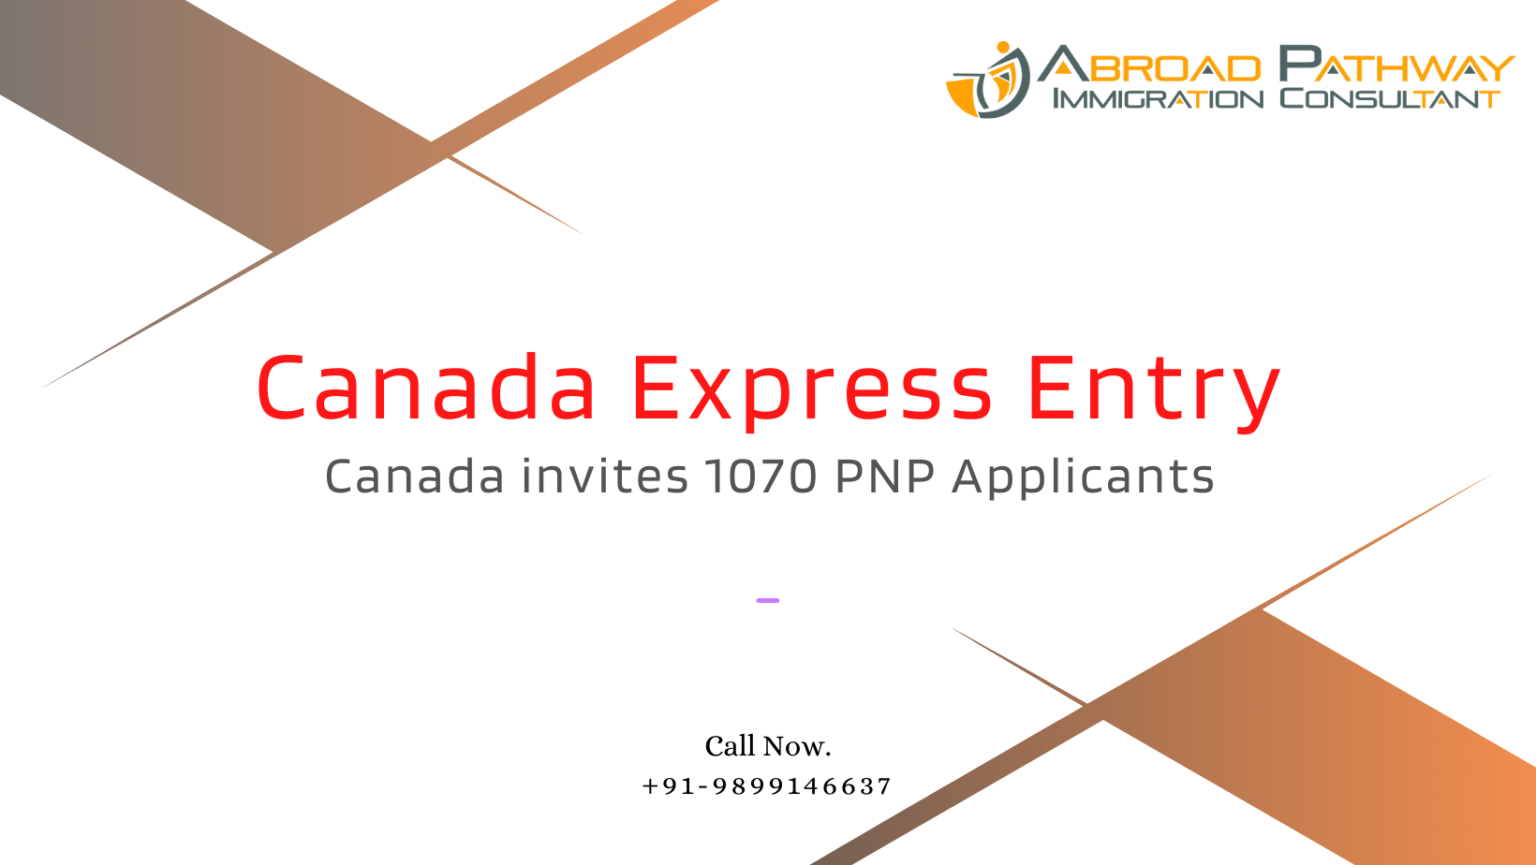 Express Entry Canada invites 1070 PNP Applicants